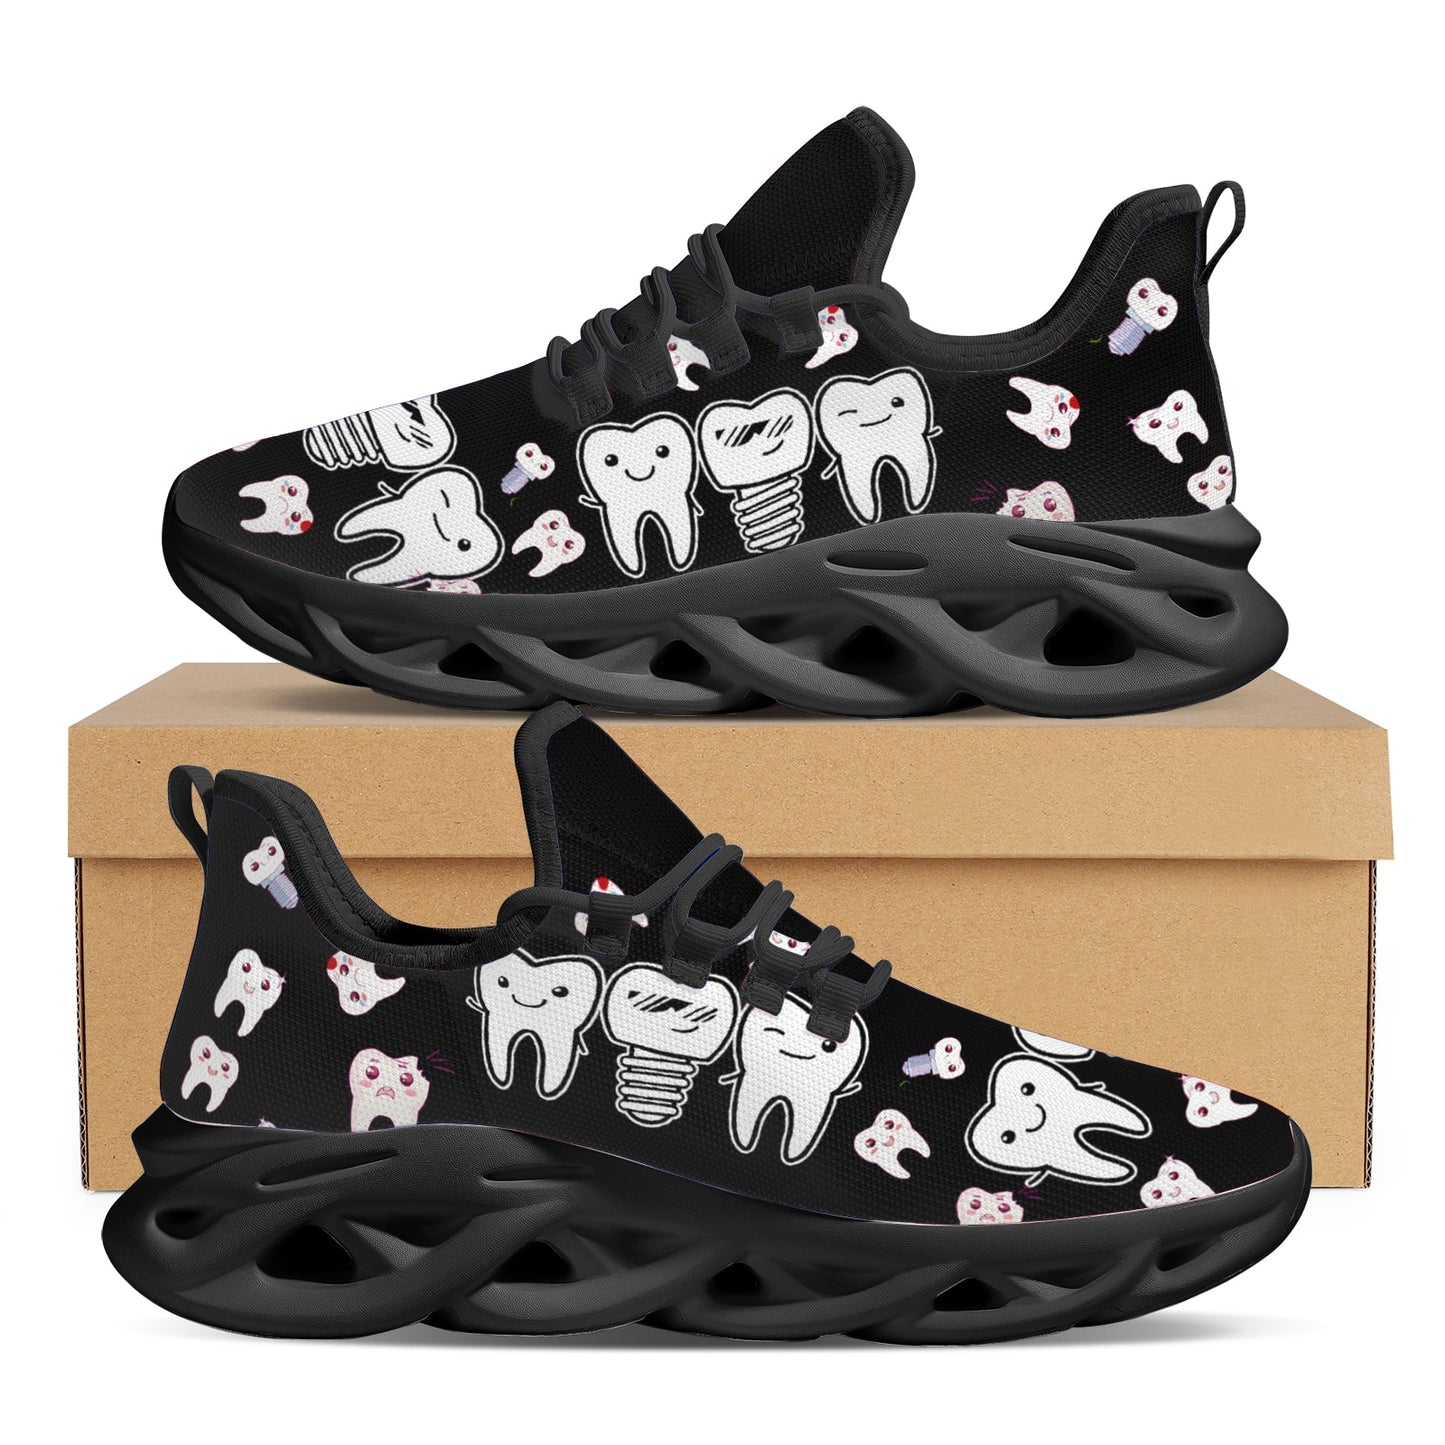 INSTANTARTS Cute Cartoon Teeth Platform Sneakers Comfortable Breathable Summer Knitted Blade Shoes Black Dental Shoes Flats